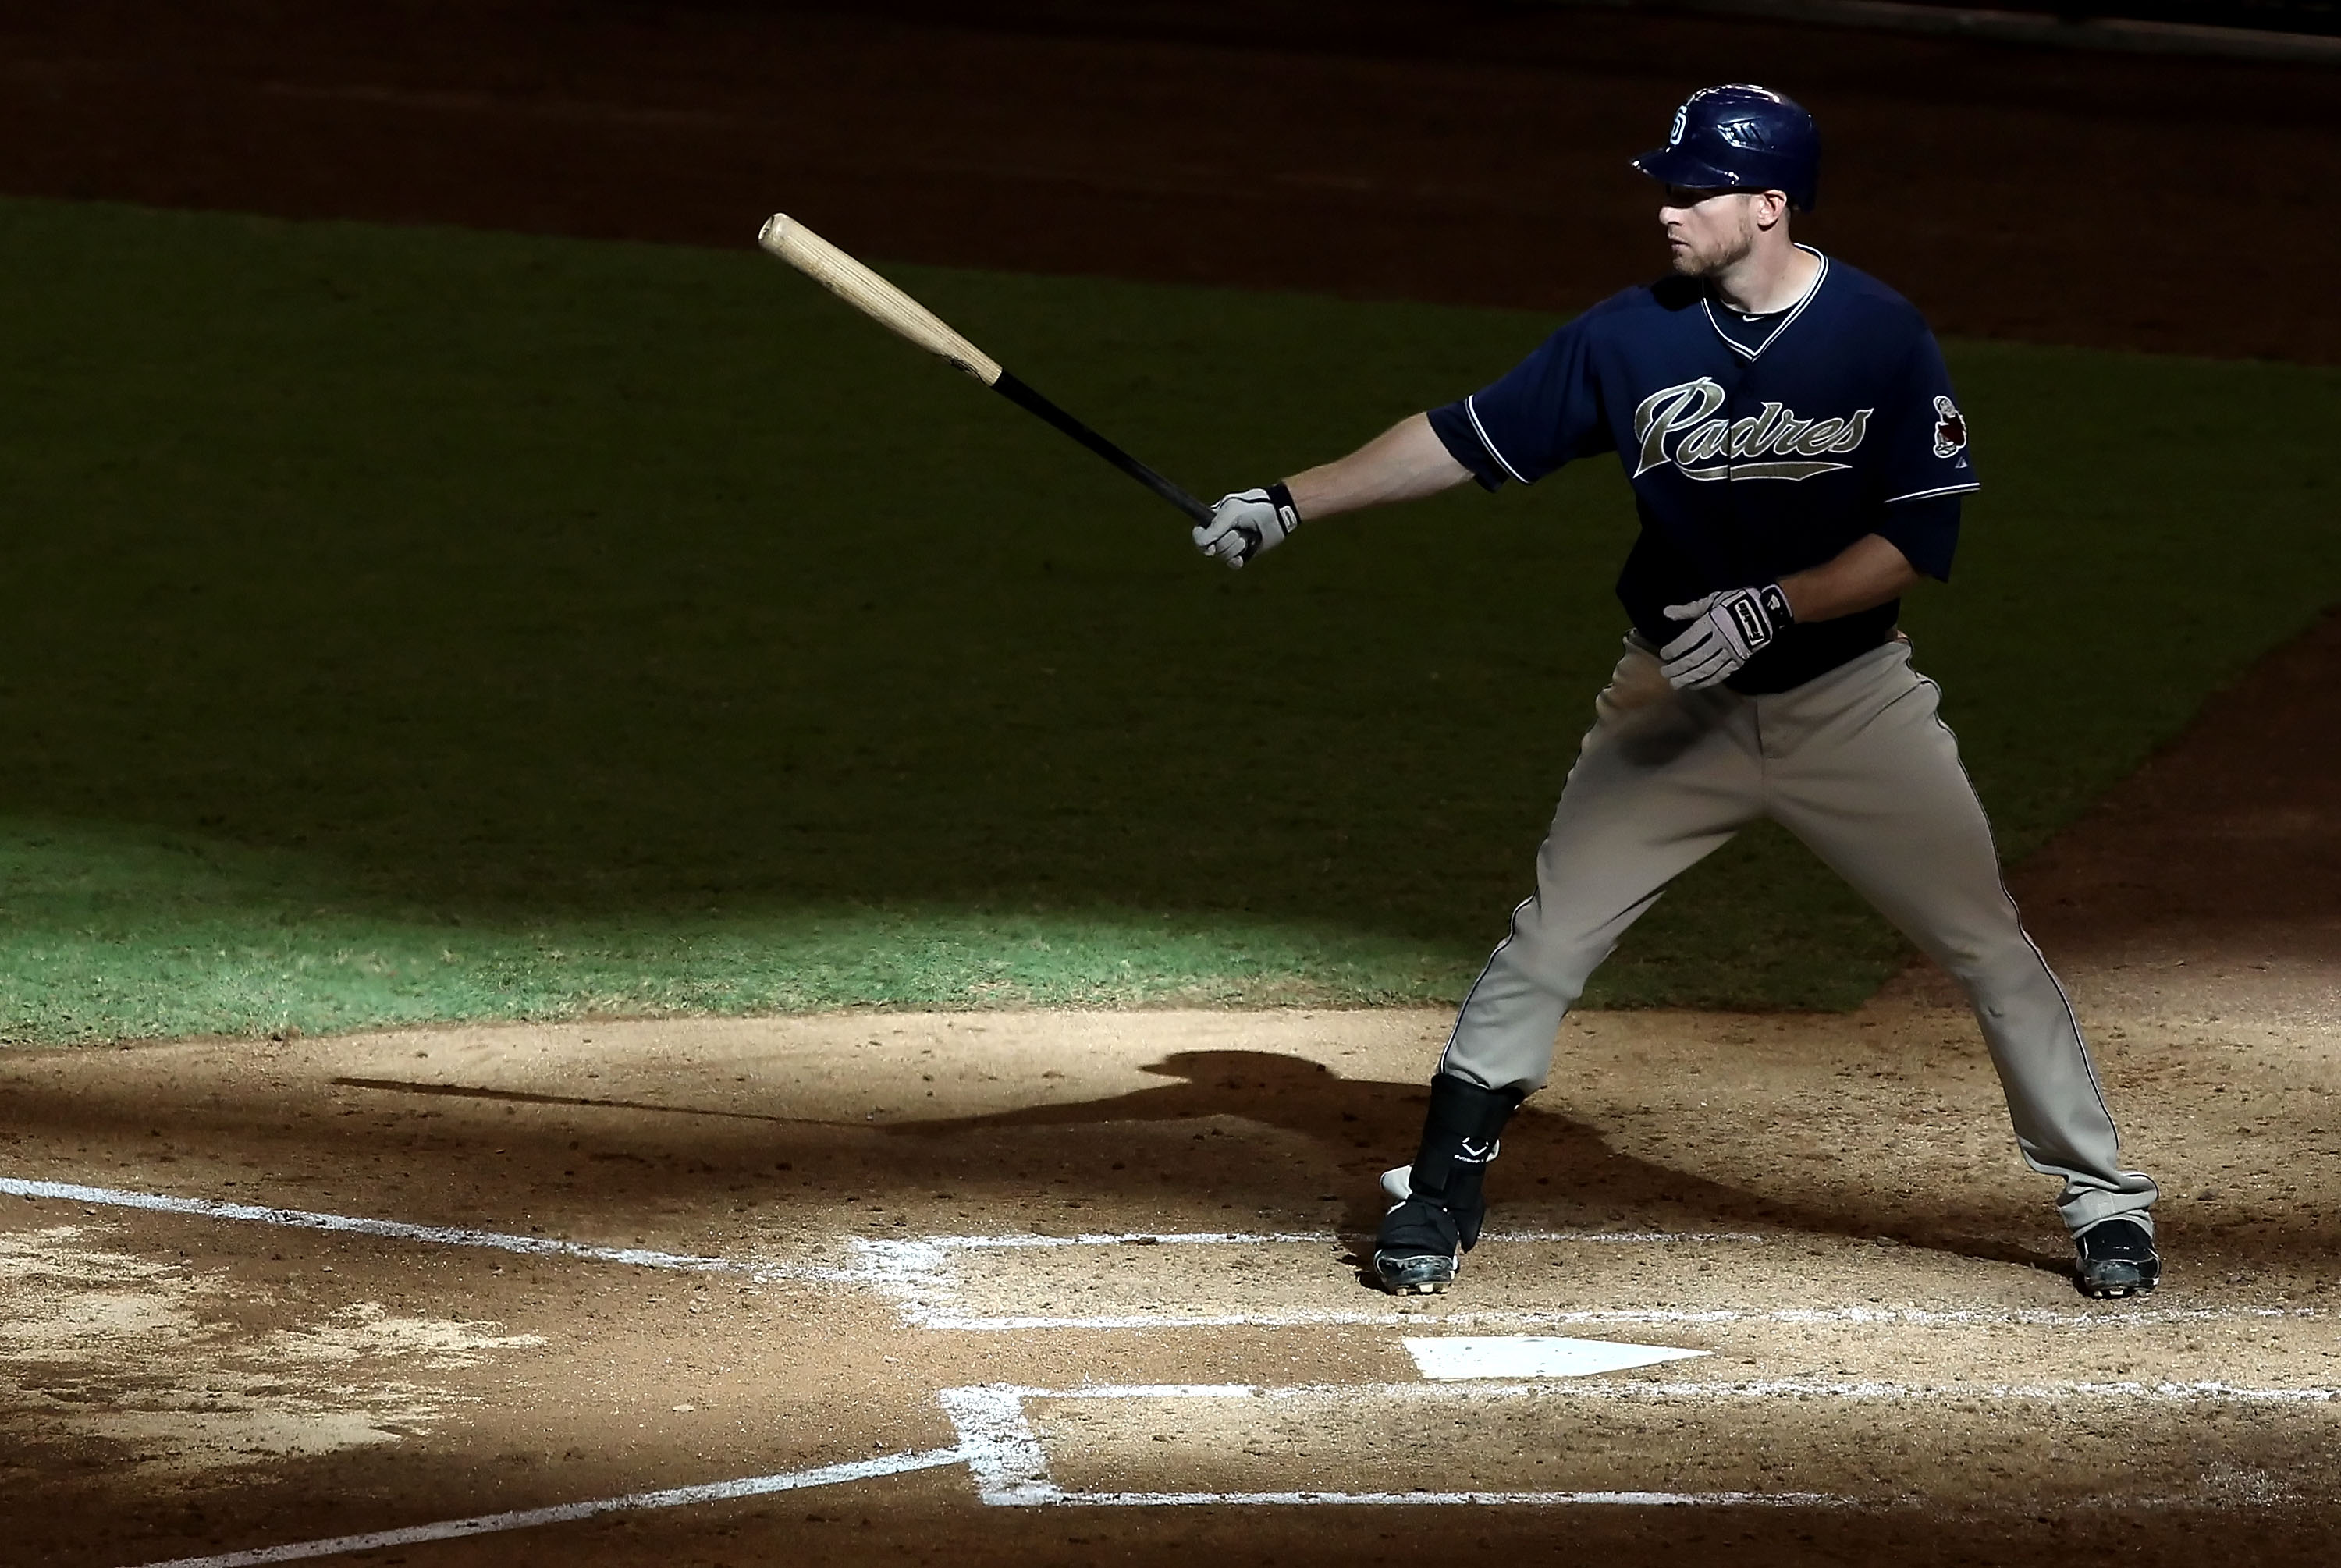 PHOENIX - SEPTEMBER 01:  Chase Headley #7 of the San Diego Padres at bat during the Major League Baseball game against the Arizona Diamondbacks at Chase Field on September 1, 2010 in Phoenix, Arizona.  The Diamondbacks defeated the Padres 5-2. (Photo by C